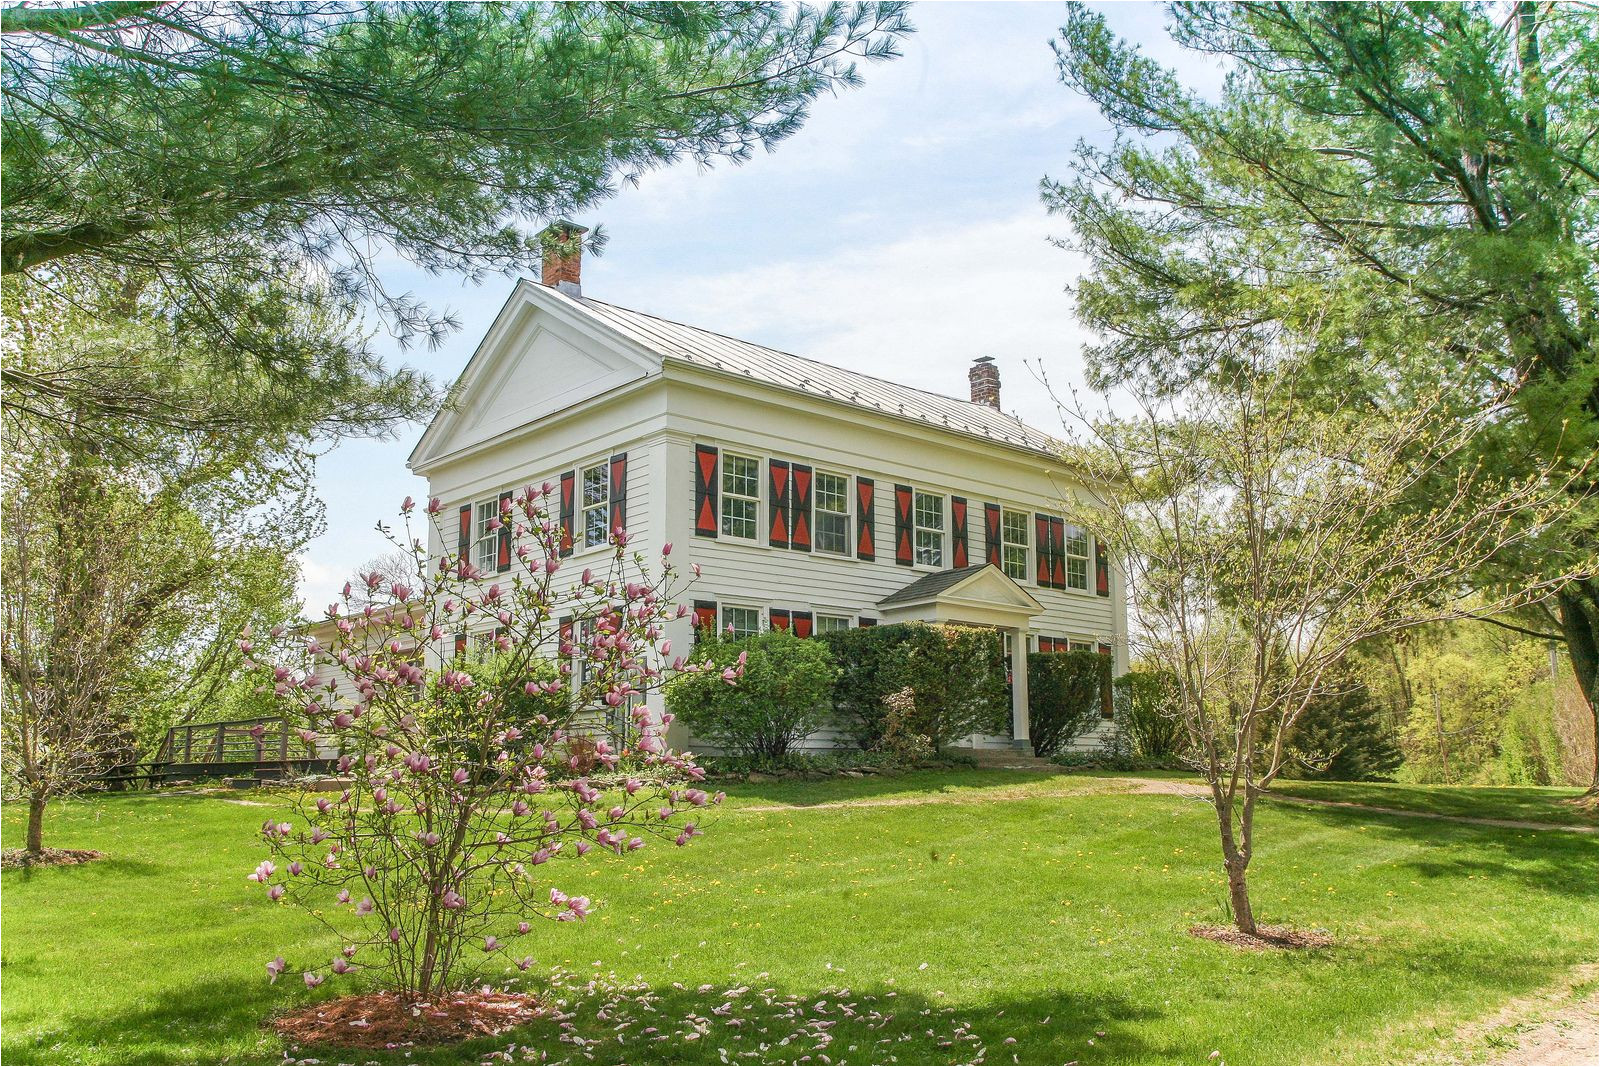 historic and elegant 261 kipp road hudson ny represented exclusively by maret halinen see more eye candy on this home at www halstead com 12350655